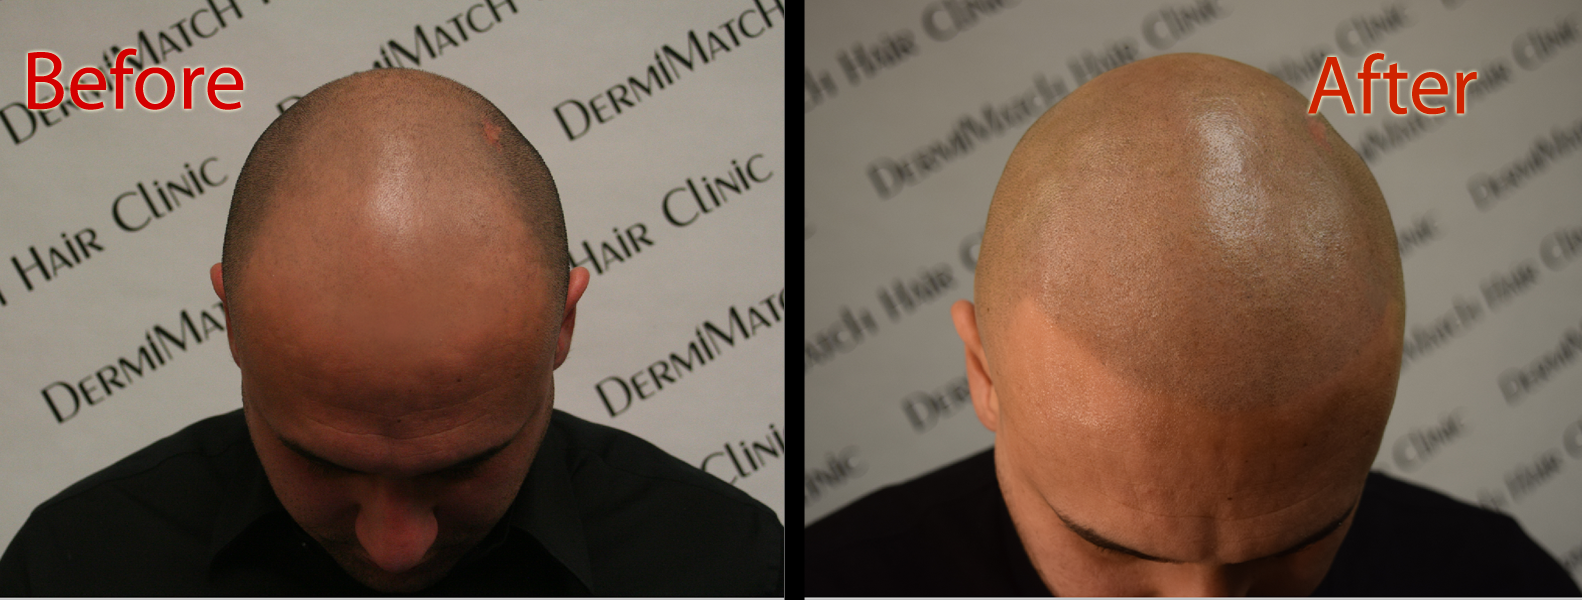 scalp micropigmentation smp for hair loss solution